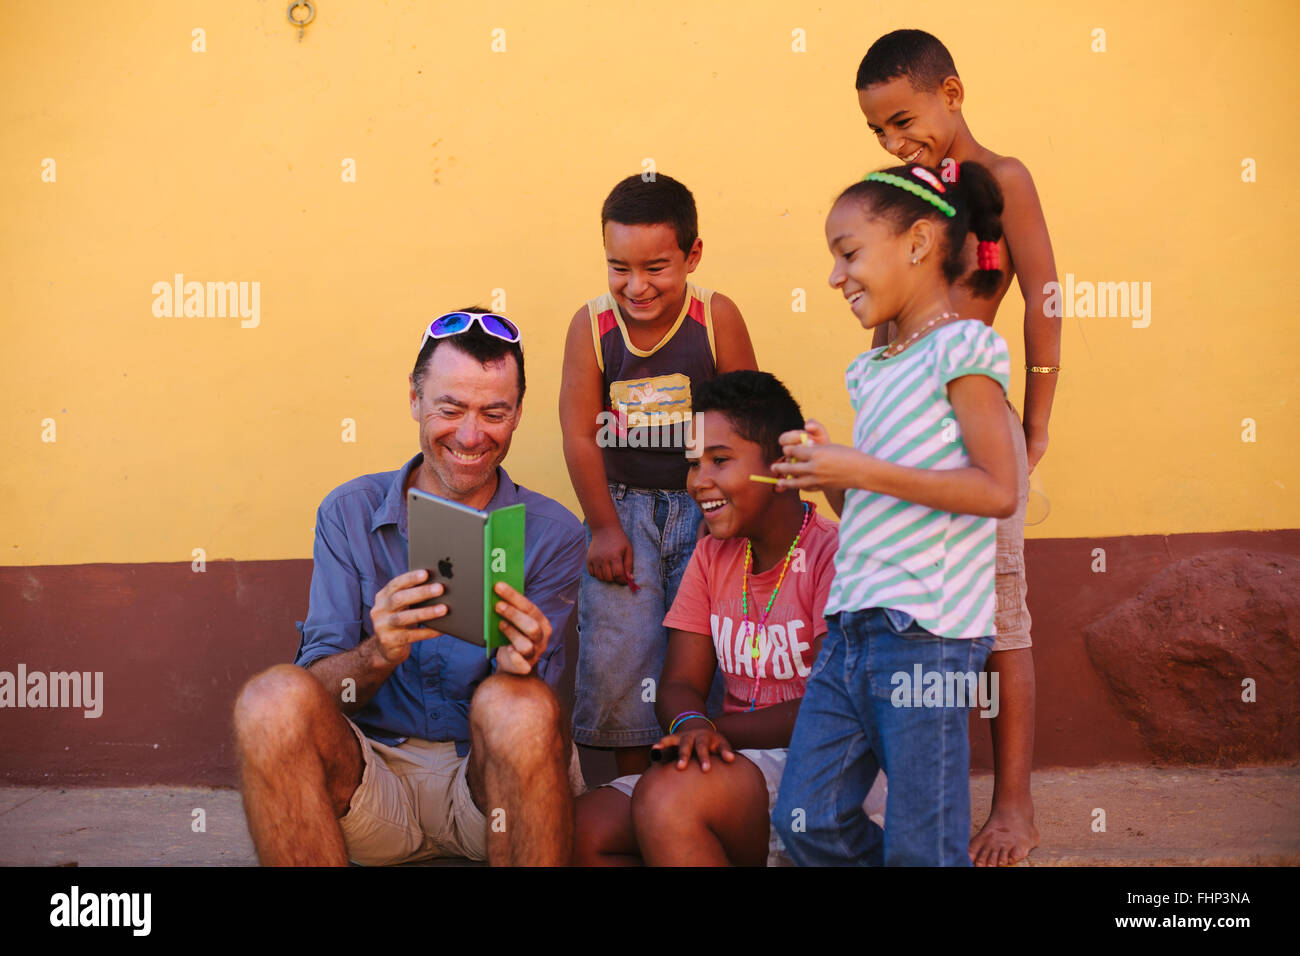 On a street in Trinidad, Cuba, a group of kids are gathered around a western male tourist and are amused by his ipad. Stock Photo